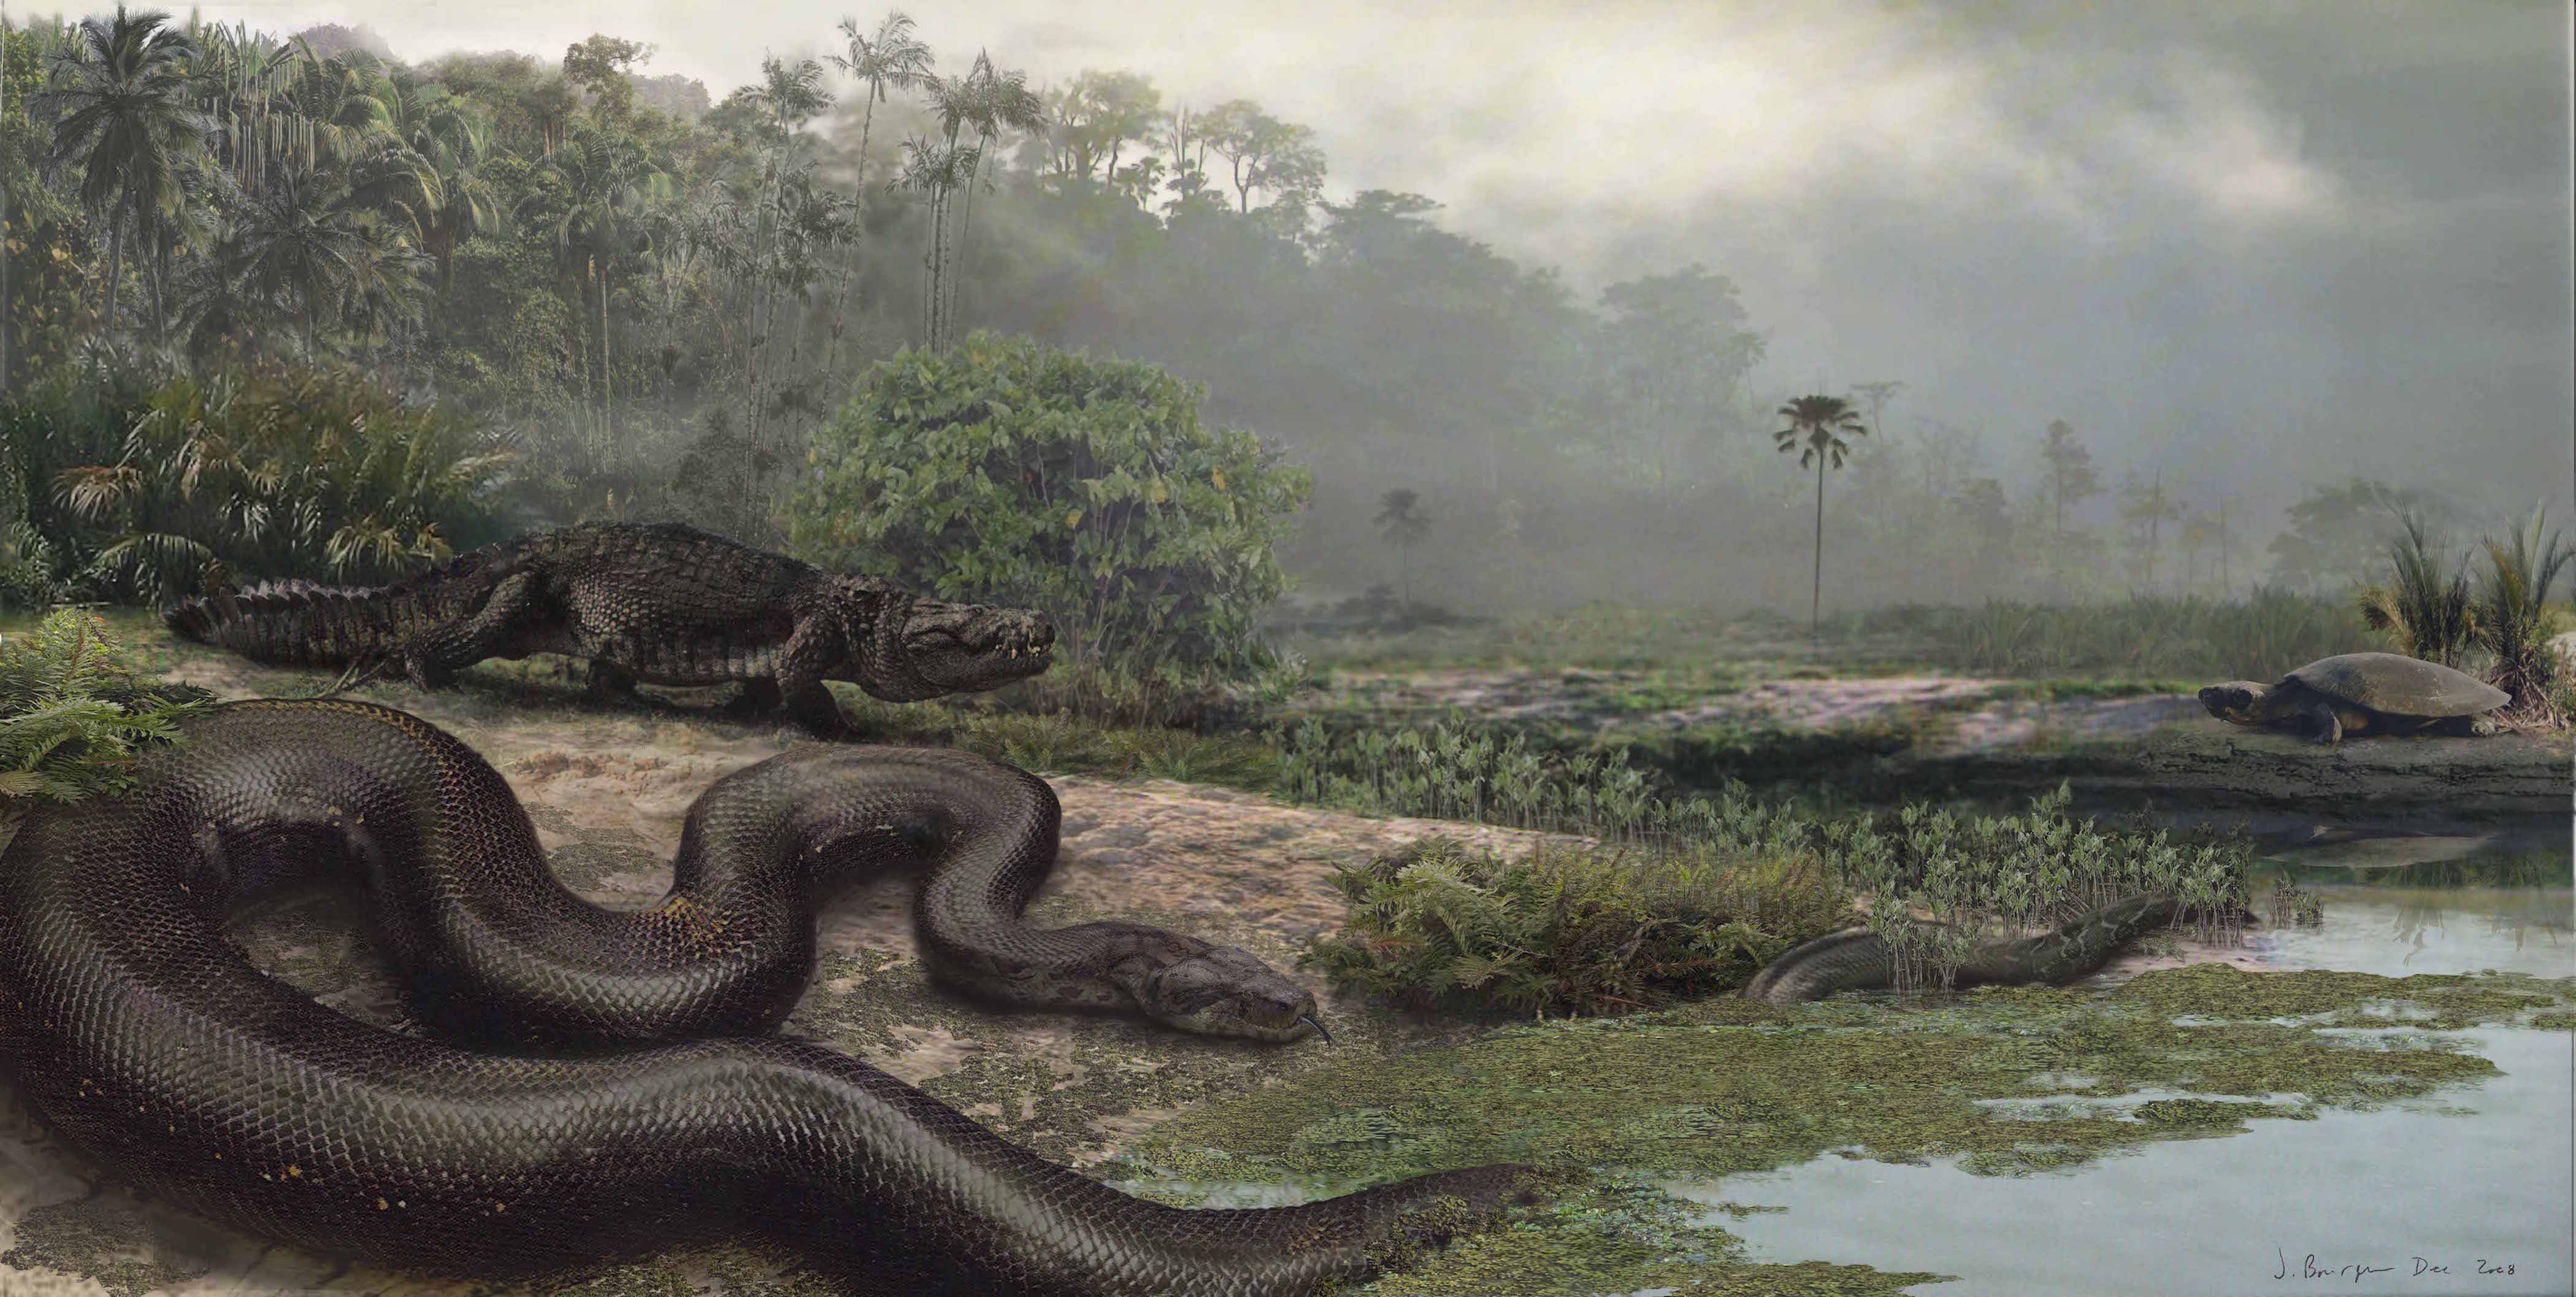 Fossil plants and animals found at the site reveal the earliest known rainforest, teeming with life and dating to the Paleocene, the lost world that followed the demise of the dinosaurs, 60 million years ago. Illustration by Jason Bourque, Florida Museum of Natural History